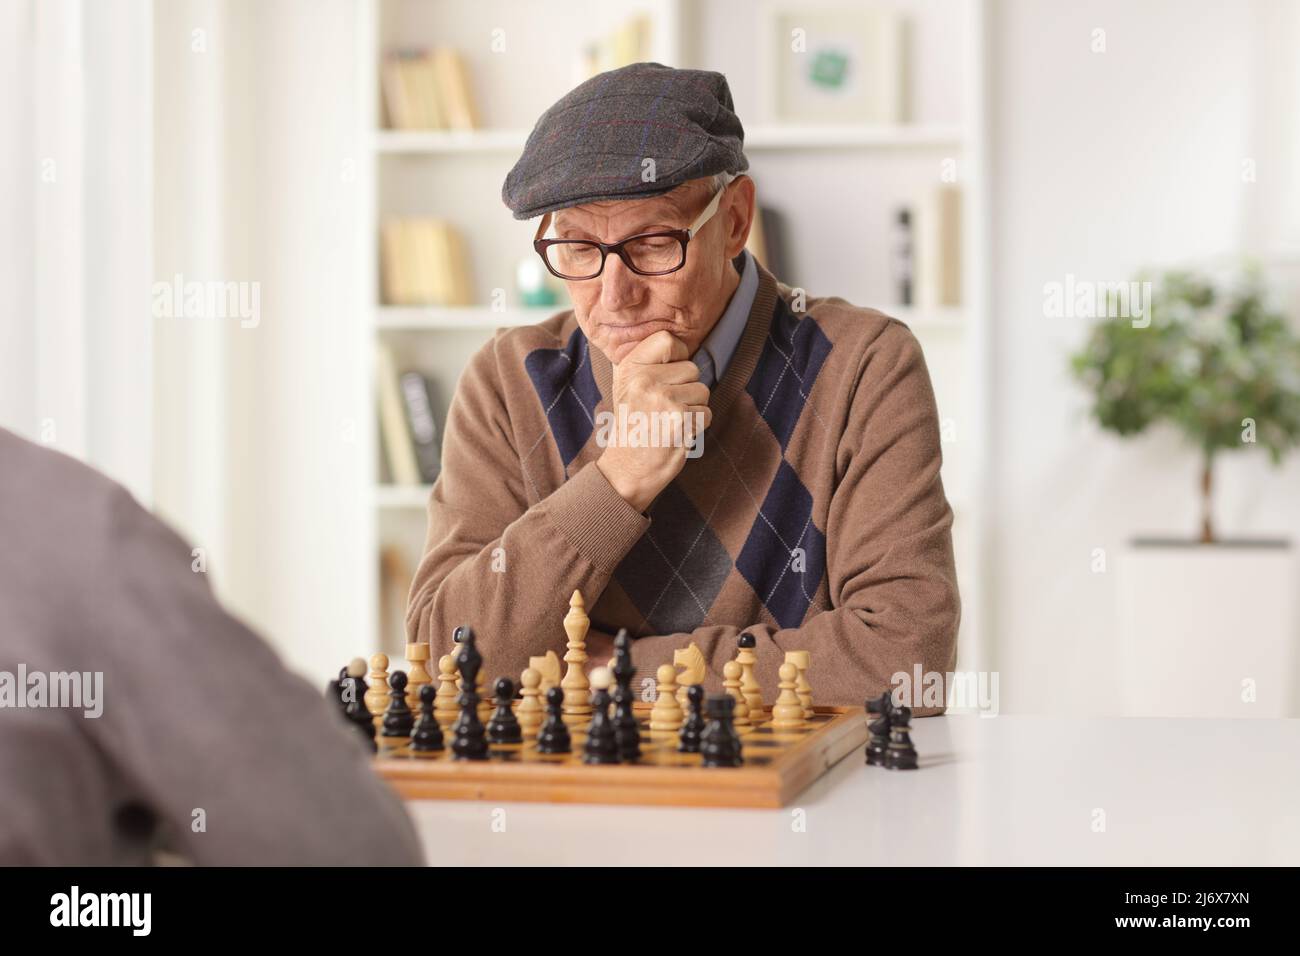 Elderly man playing chess at a table at home Stock Photo